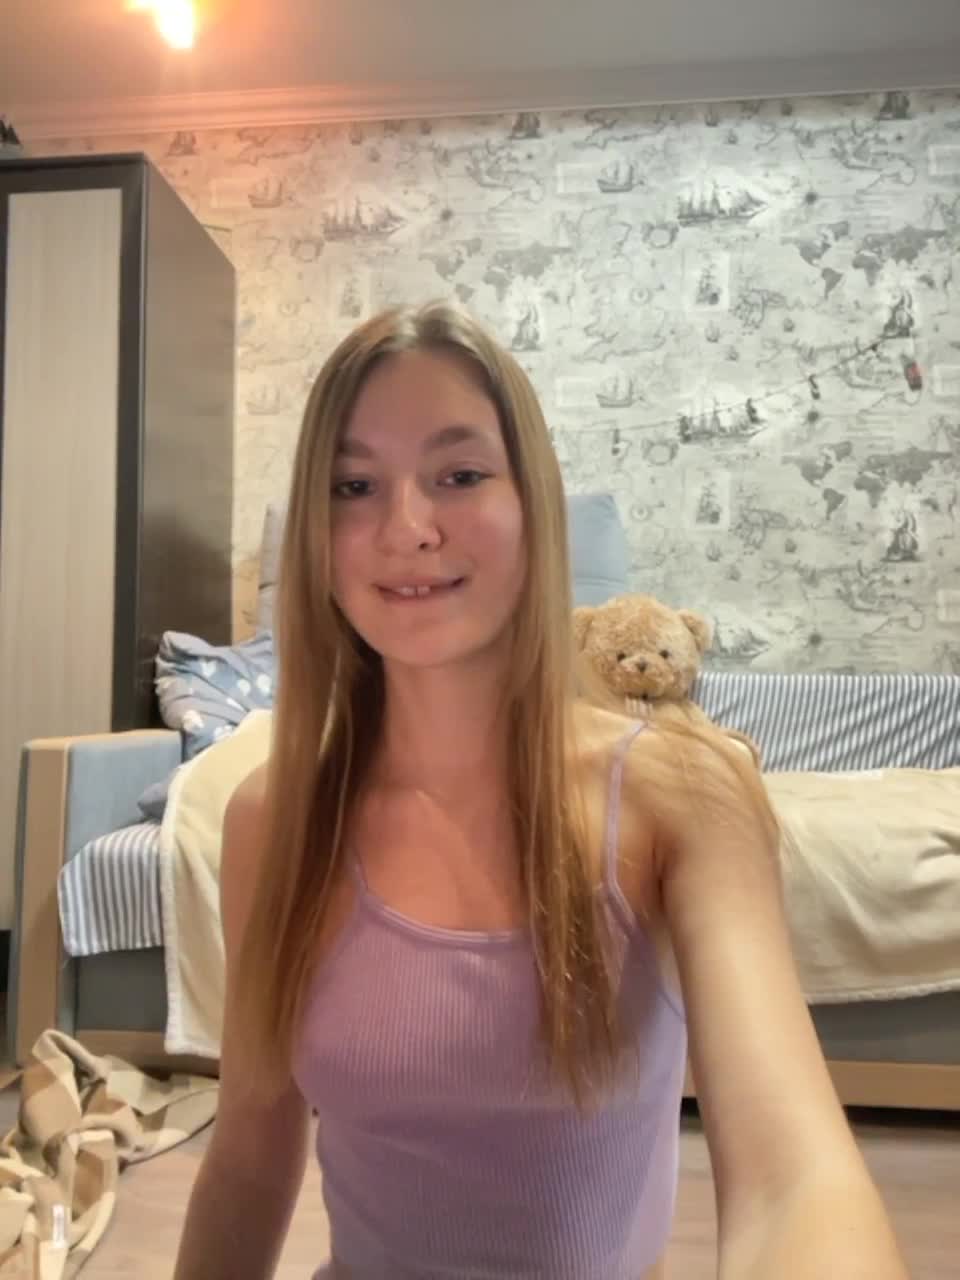 View or download file anusyk on 2023-02-24 from bongacams